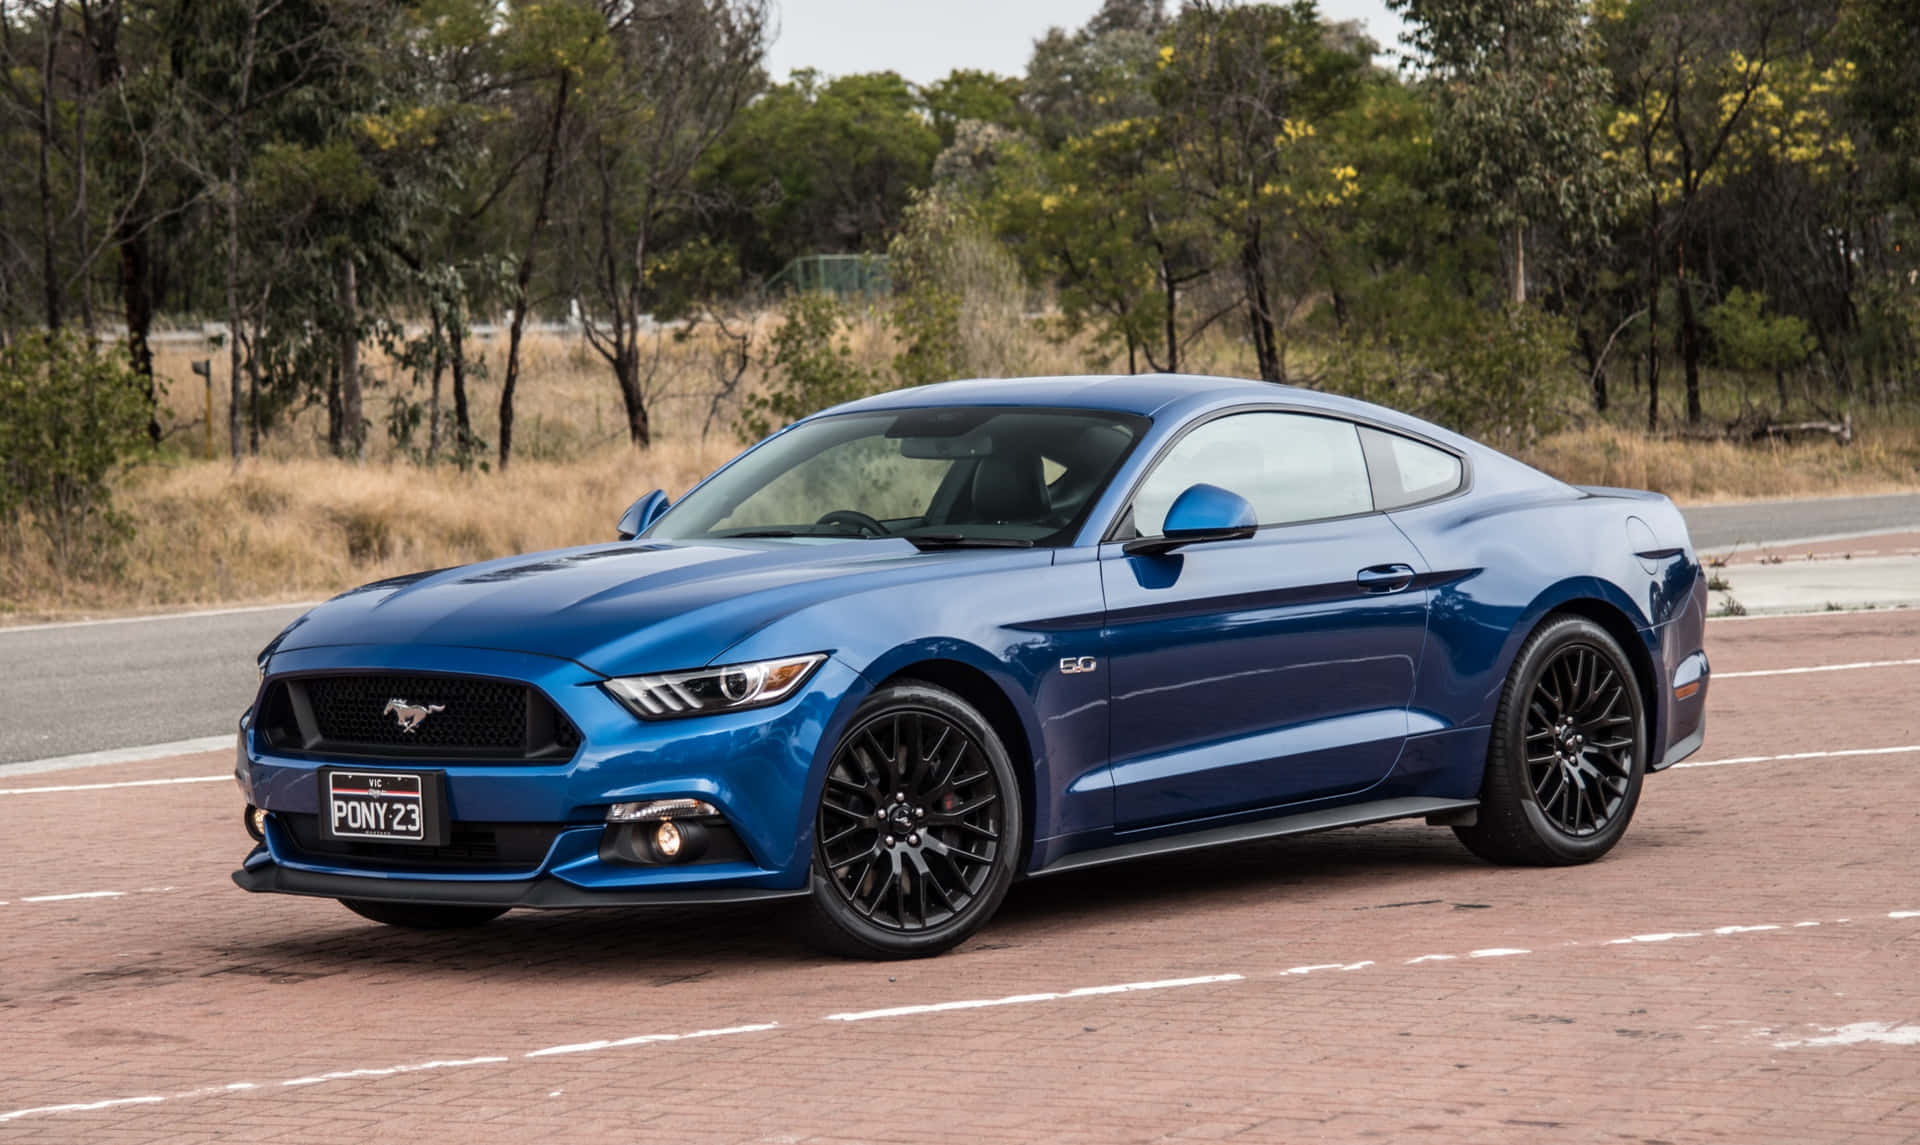 The Blue Ford Mustang Is Driving Down The Road